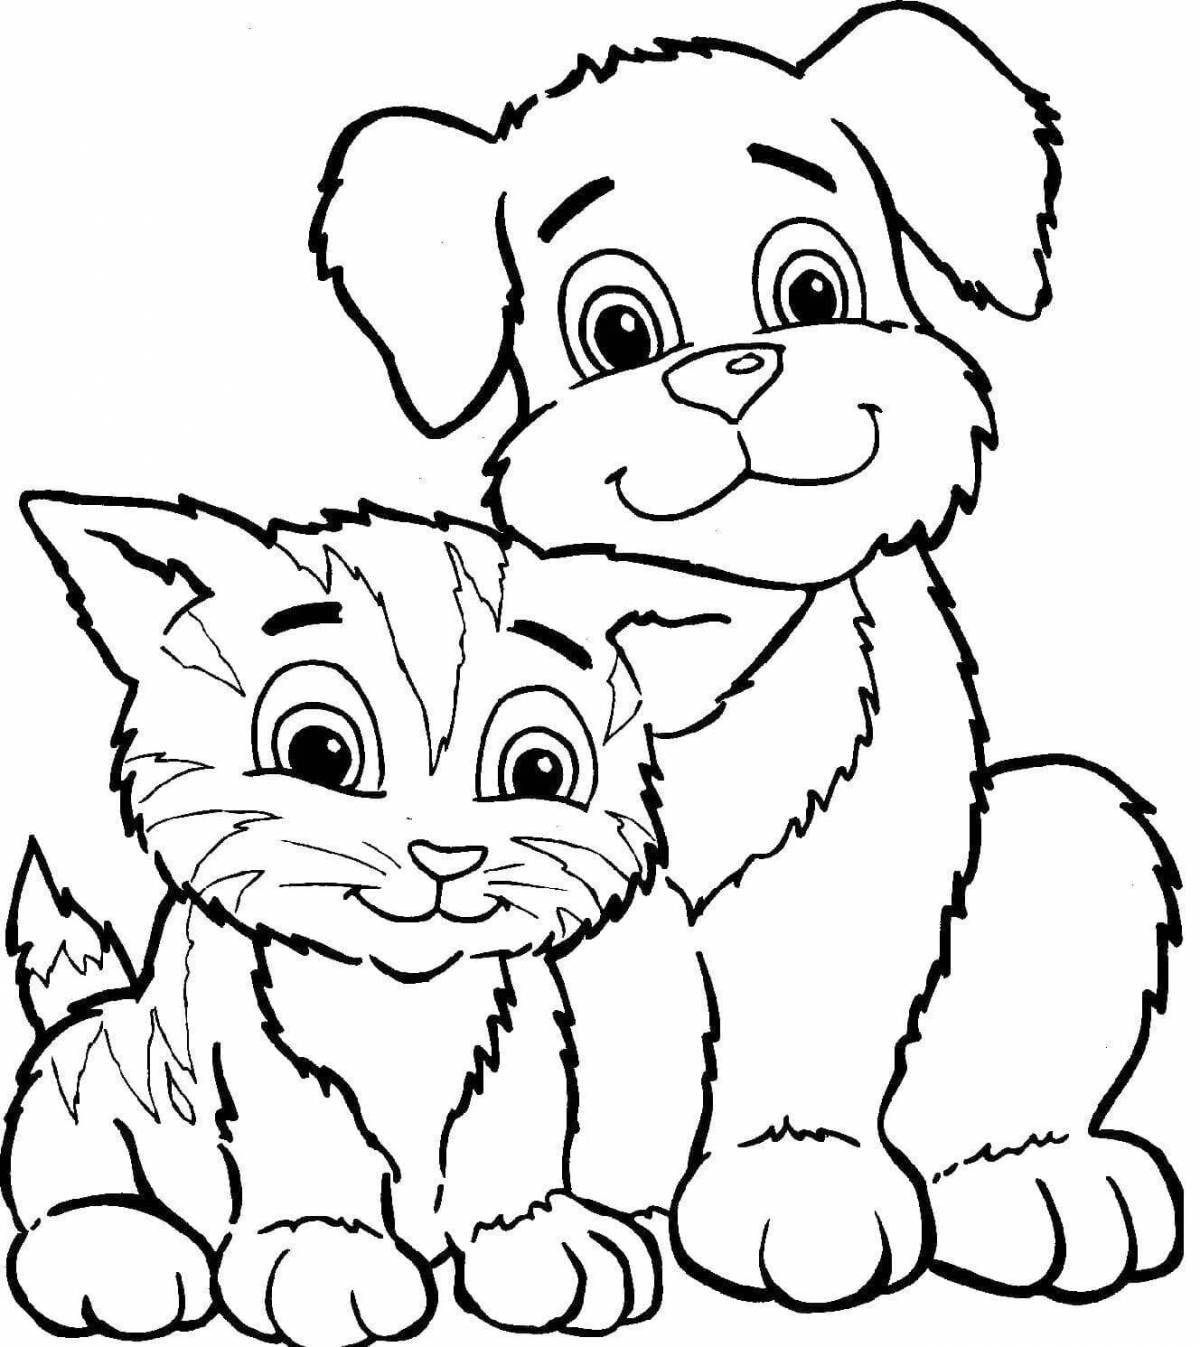 Violent animal drawing coloring page